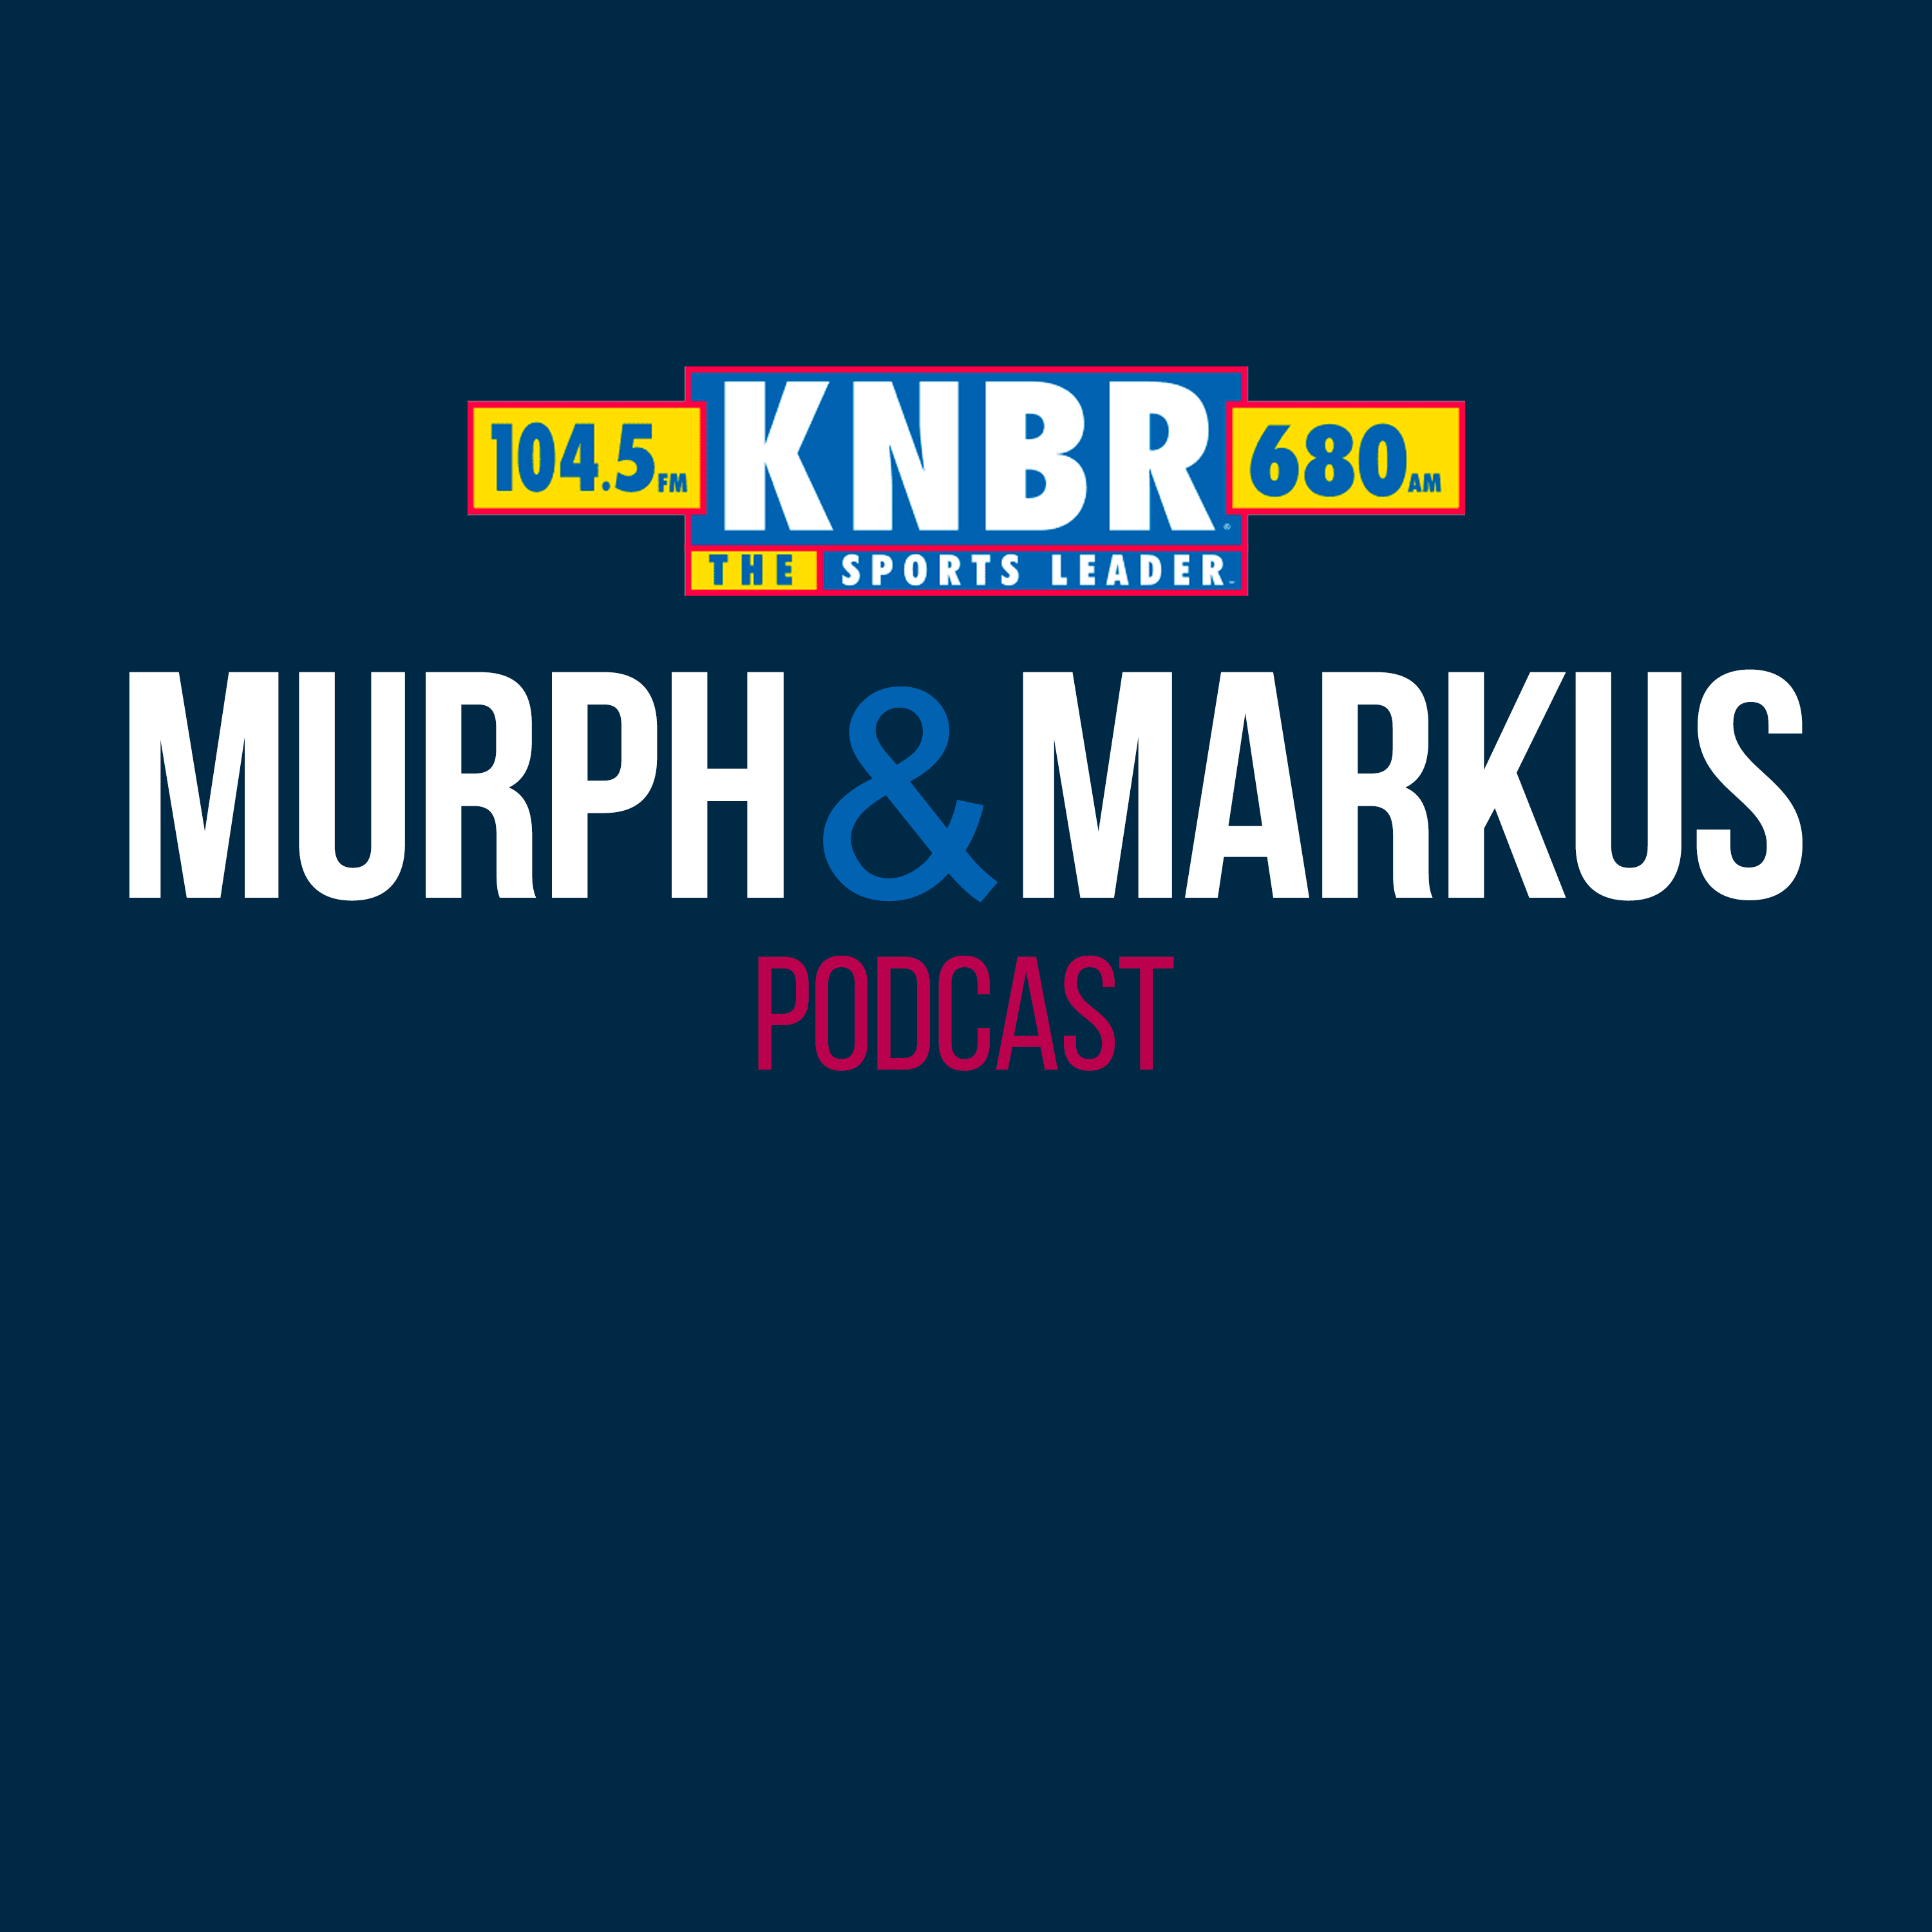 5/22 Newest 49er, Leonard Floyd stopped by Murph and Markus to discuss why he signed with the 49ers along with telling us that the faithful takes over the Rams stadium on game day.